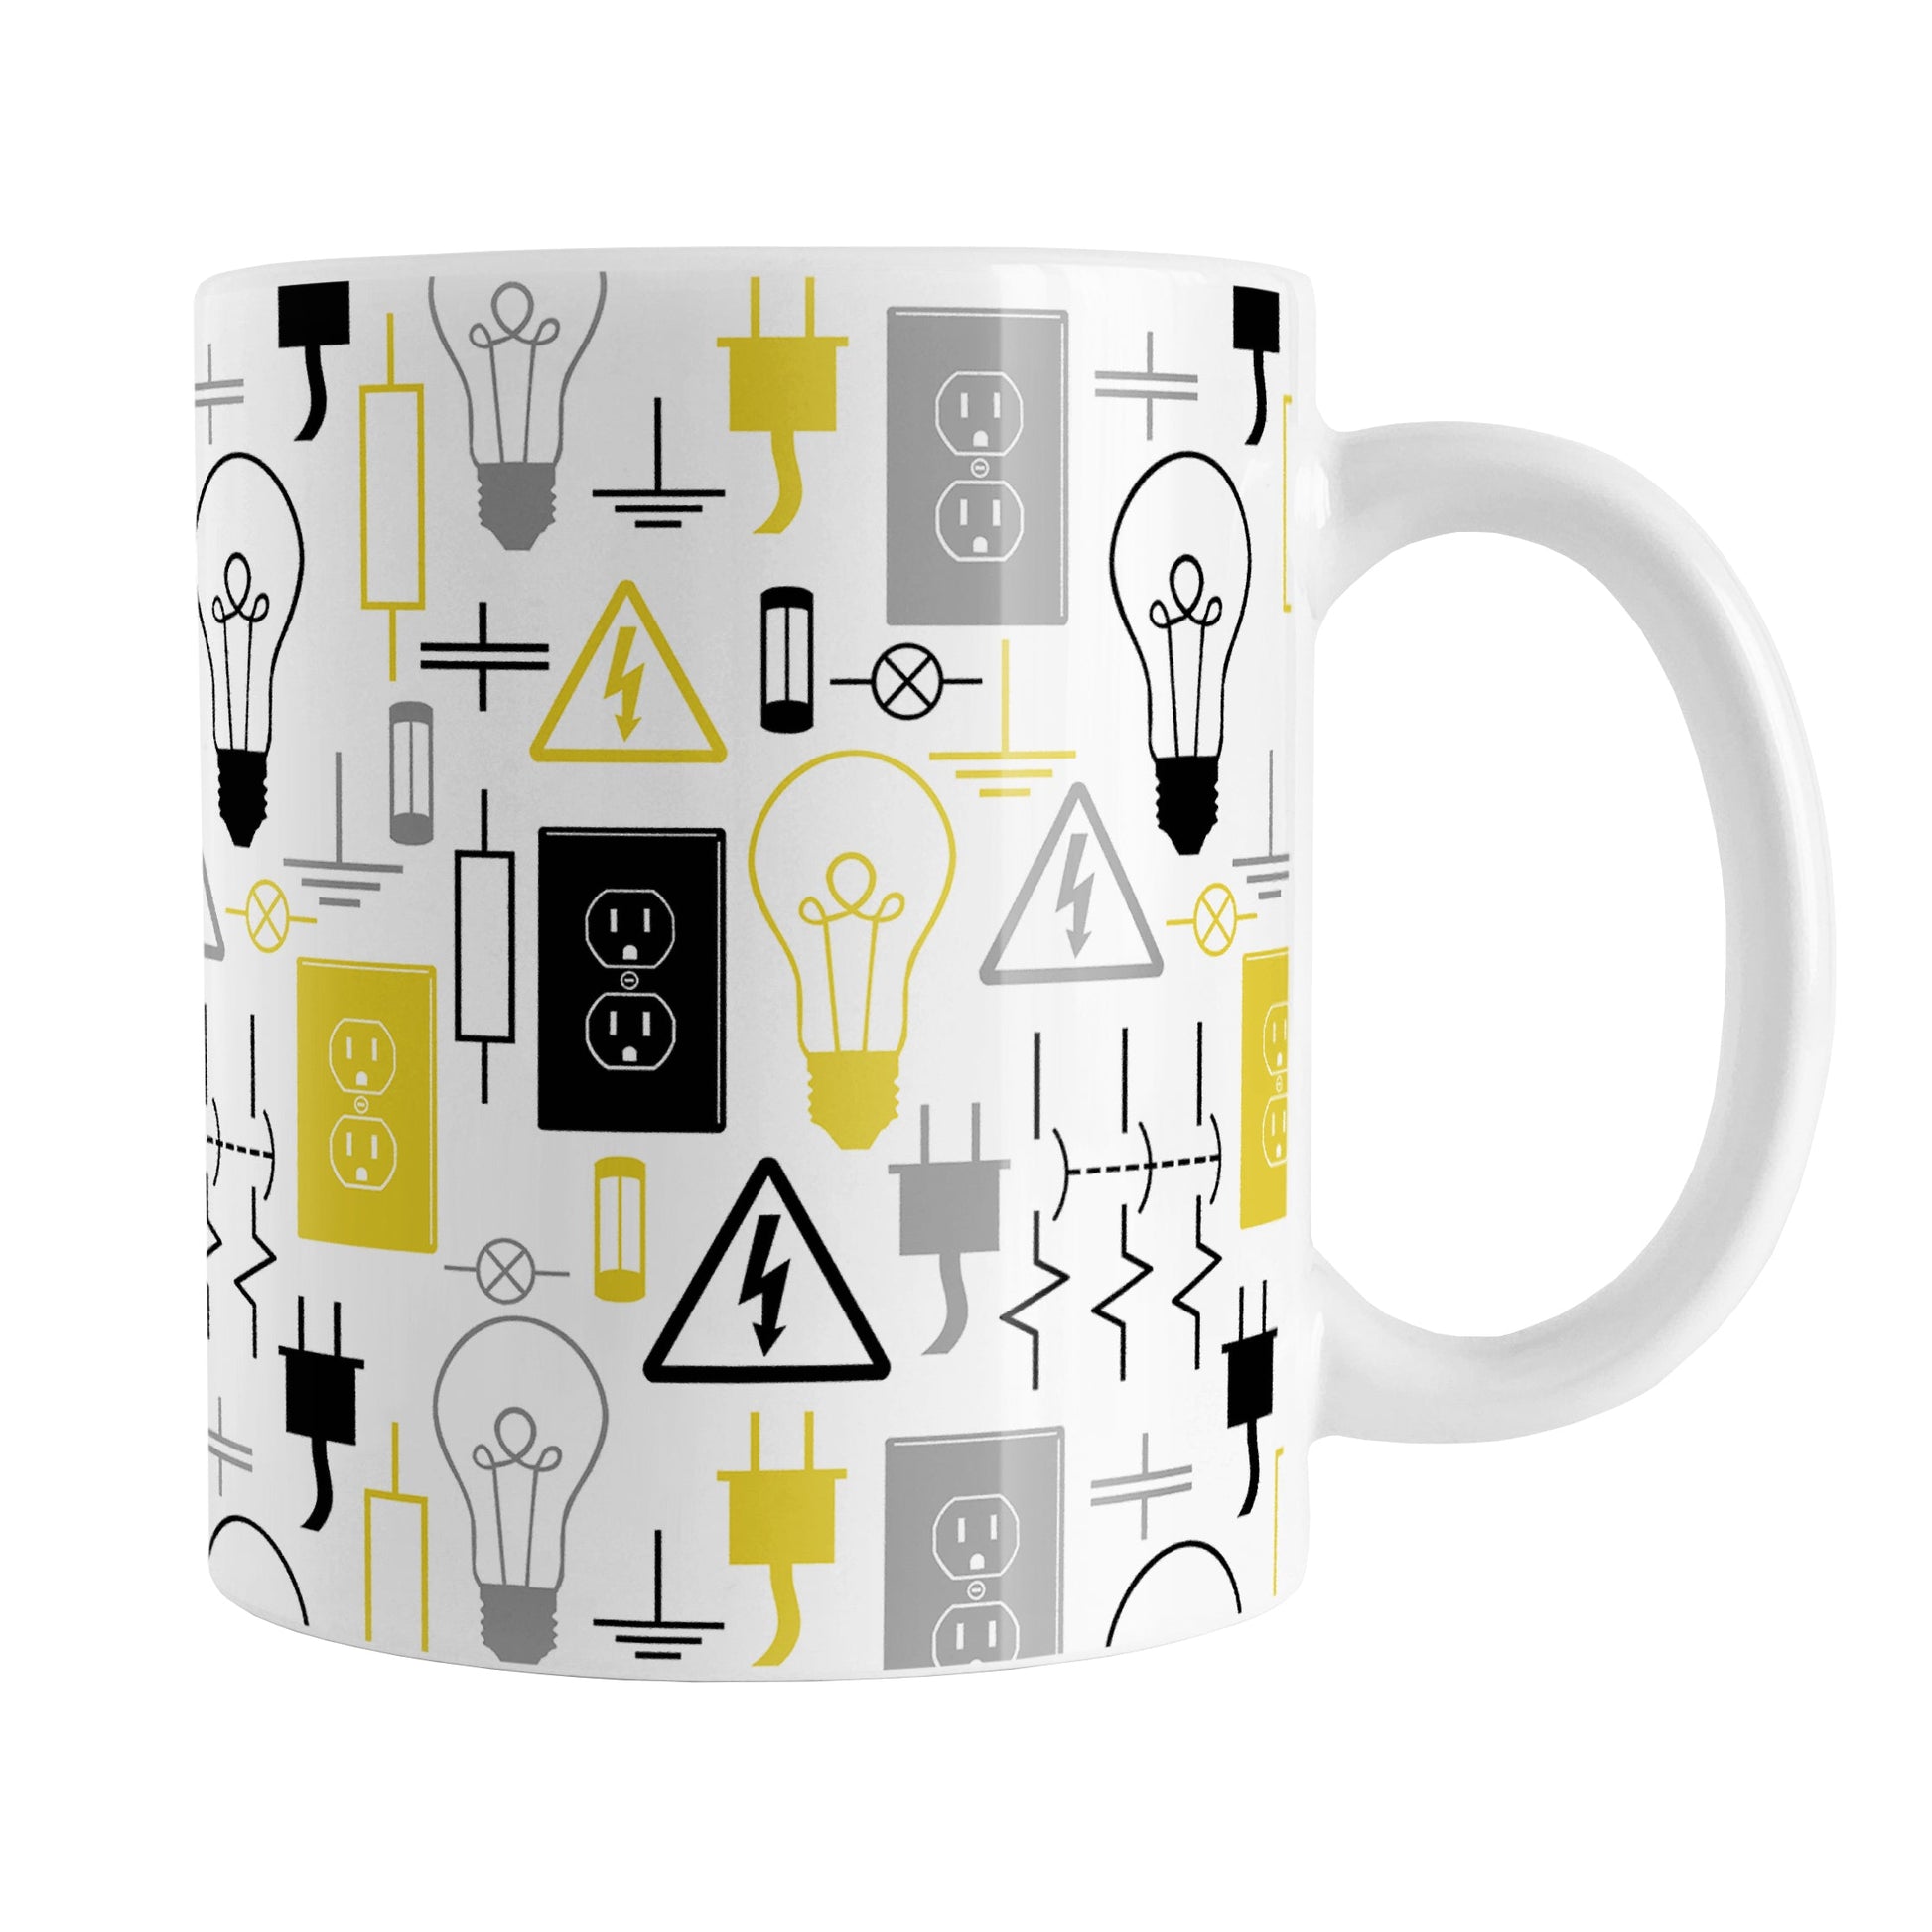 Yellow Electrical Pattern Mug (11oz) at Amy's Coffee Mugs. A ceramic coffee mug designed with an electrical pattern with light bulbs, wall sockets, plugs, fuses, and other electricity symbols in yellow, gray, and black colors. This mug is perfect for people who work a trade as an electrician or love working with electronics. 